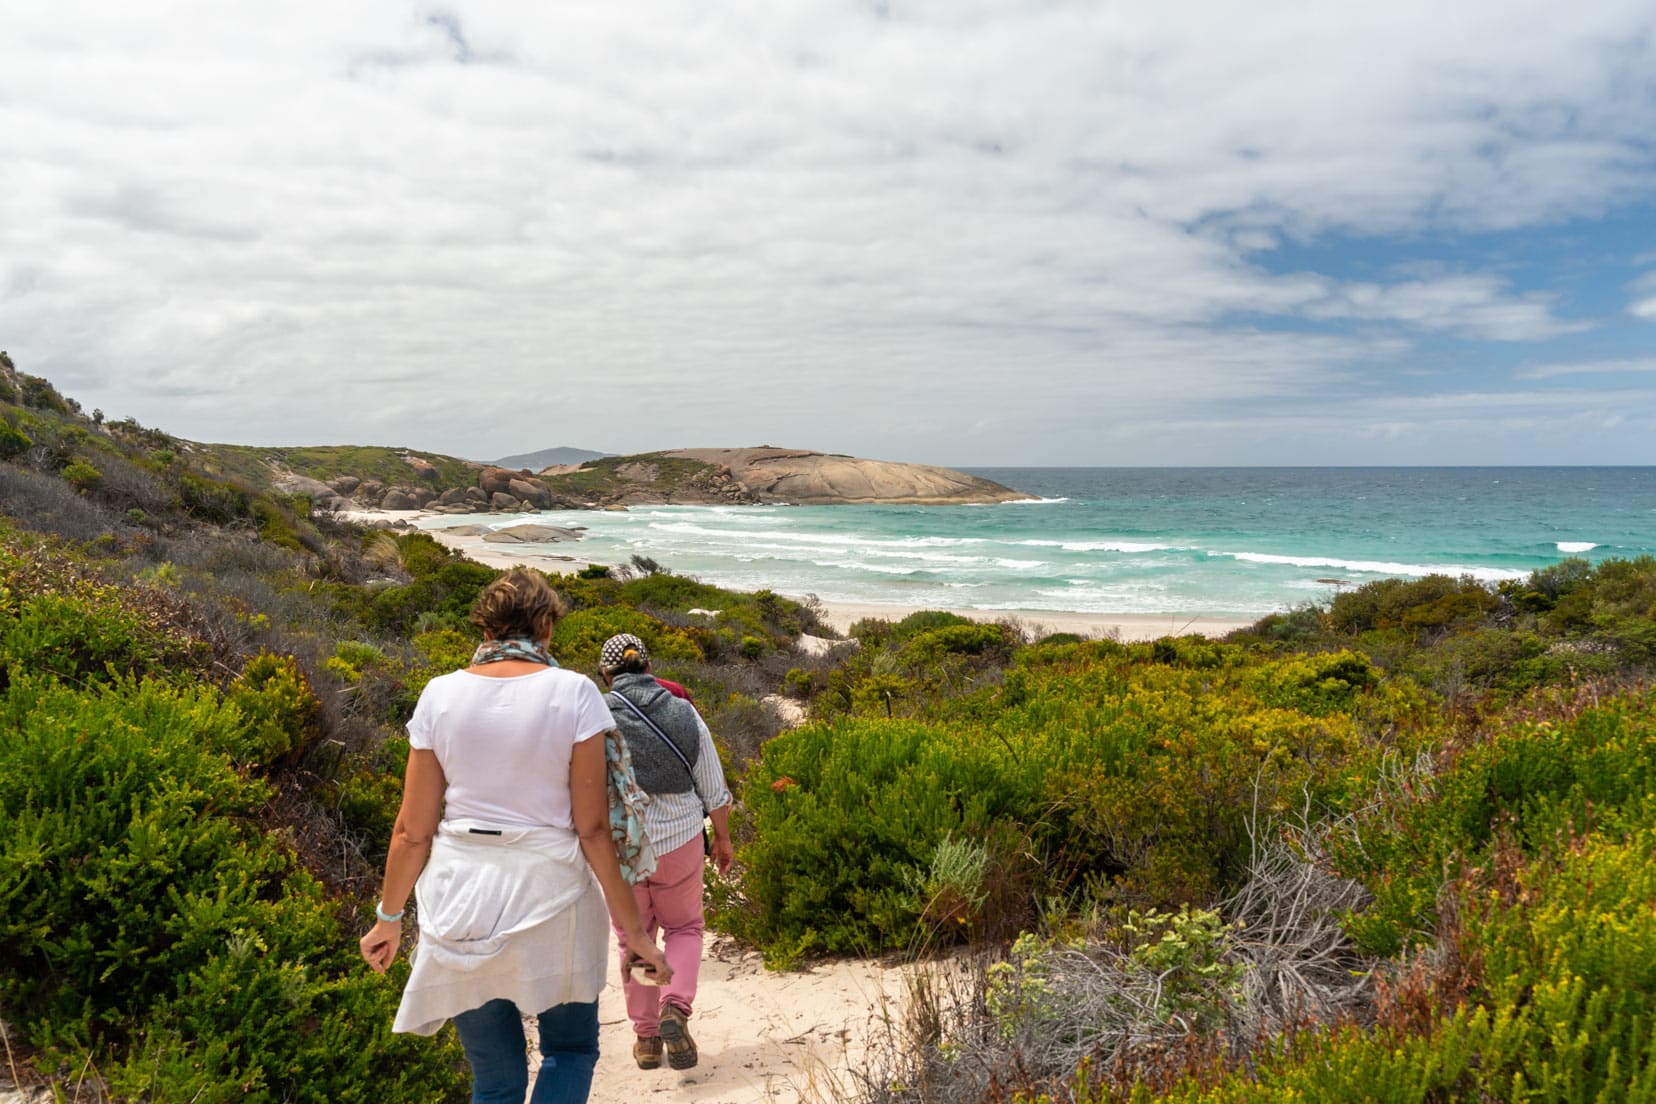 Small hike to Shelly Beach with Gary leading the way and a view ot turquoise bay and rocky promontory